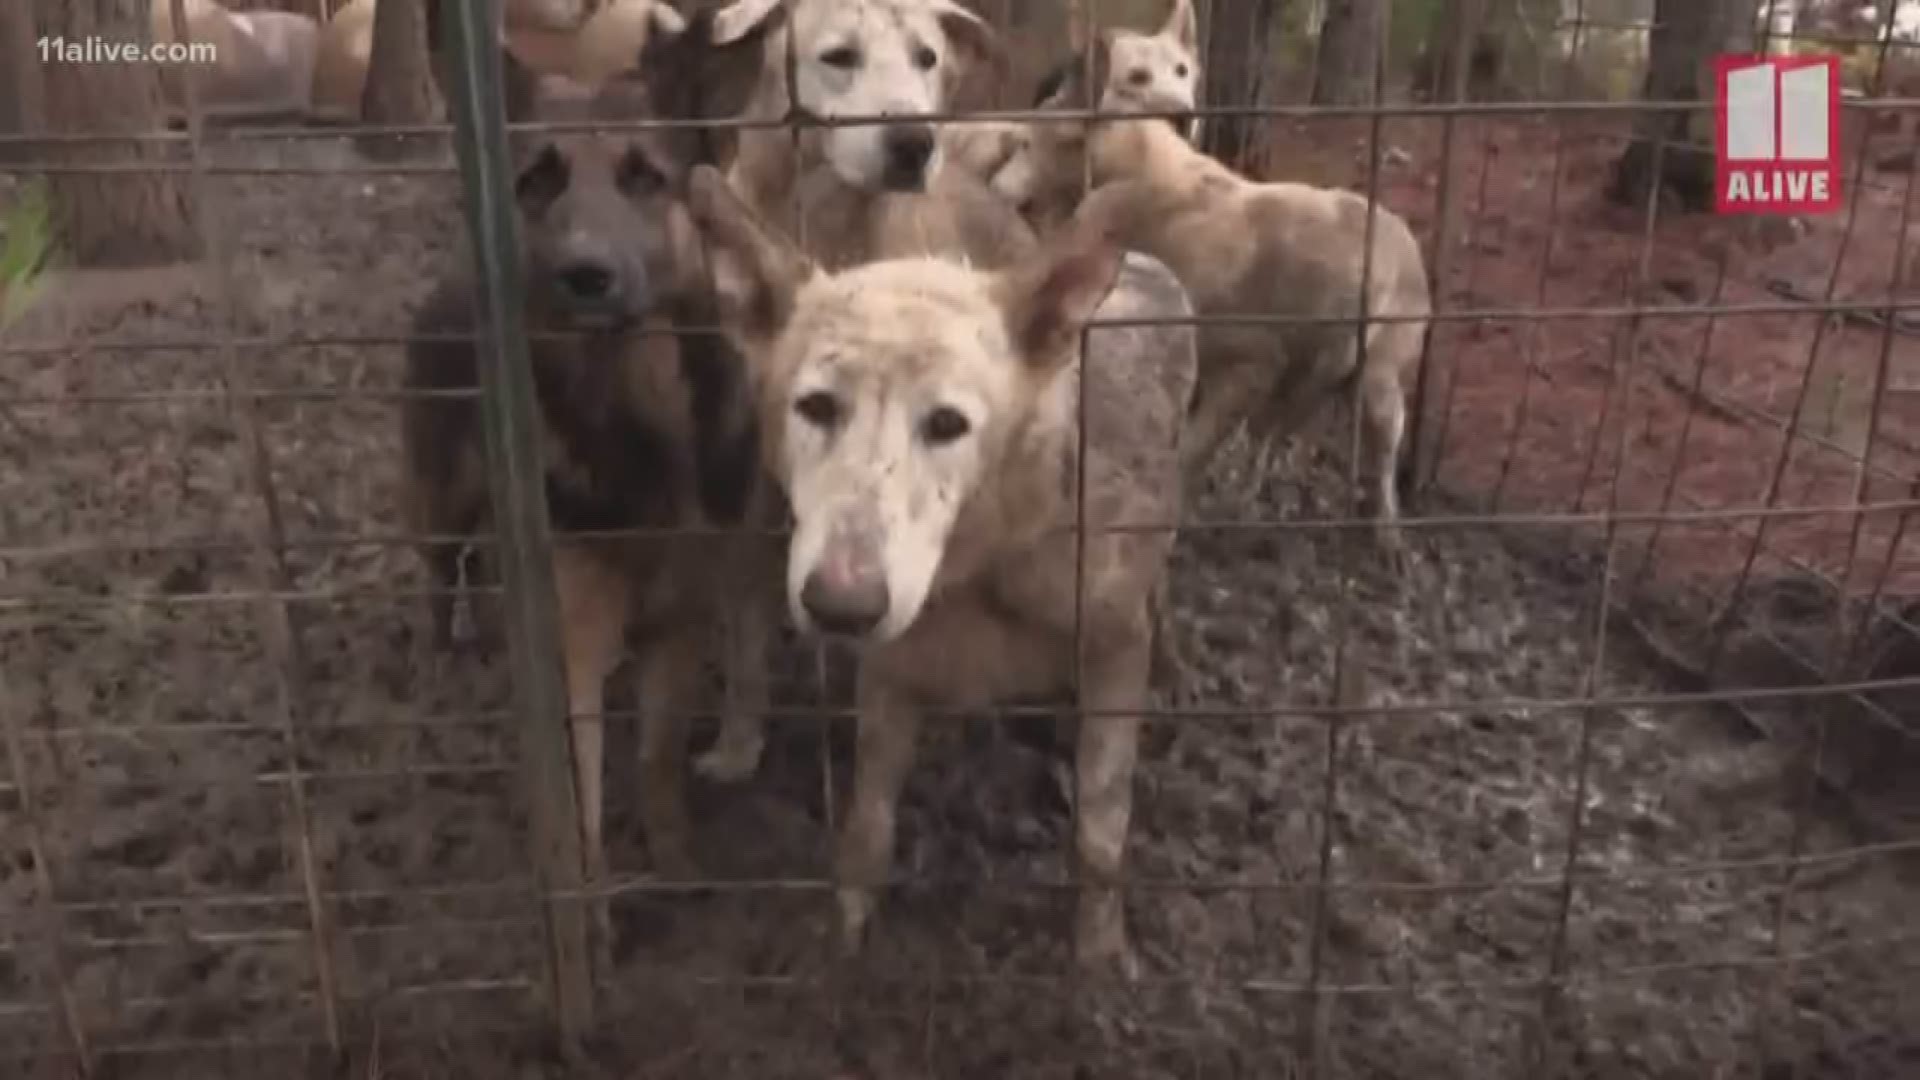 11Alive's Kaitlyn Ross and Rebecca Lindstrom discuss solutions to Georgia's puppy mill problem in this online discussion.